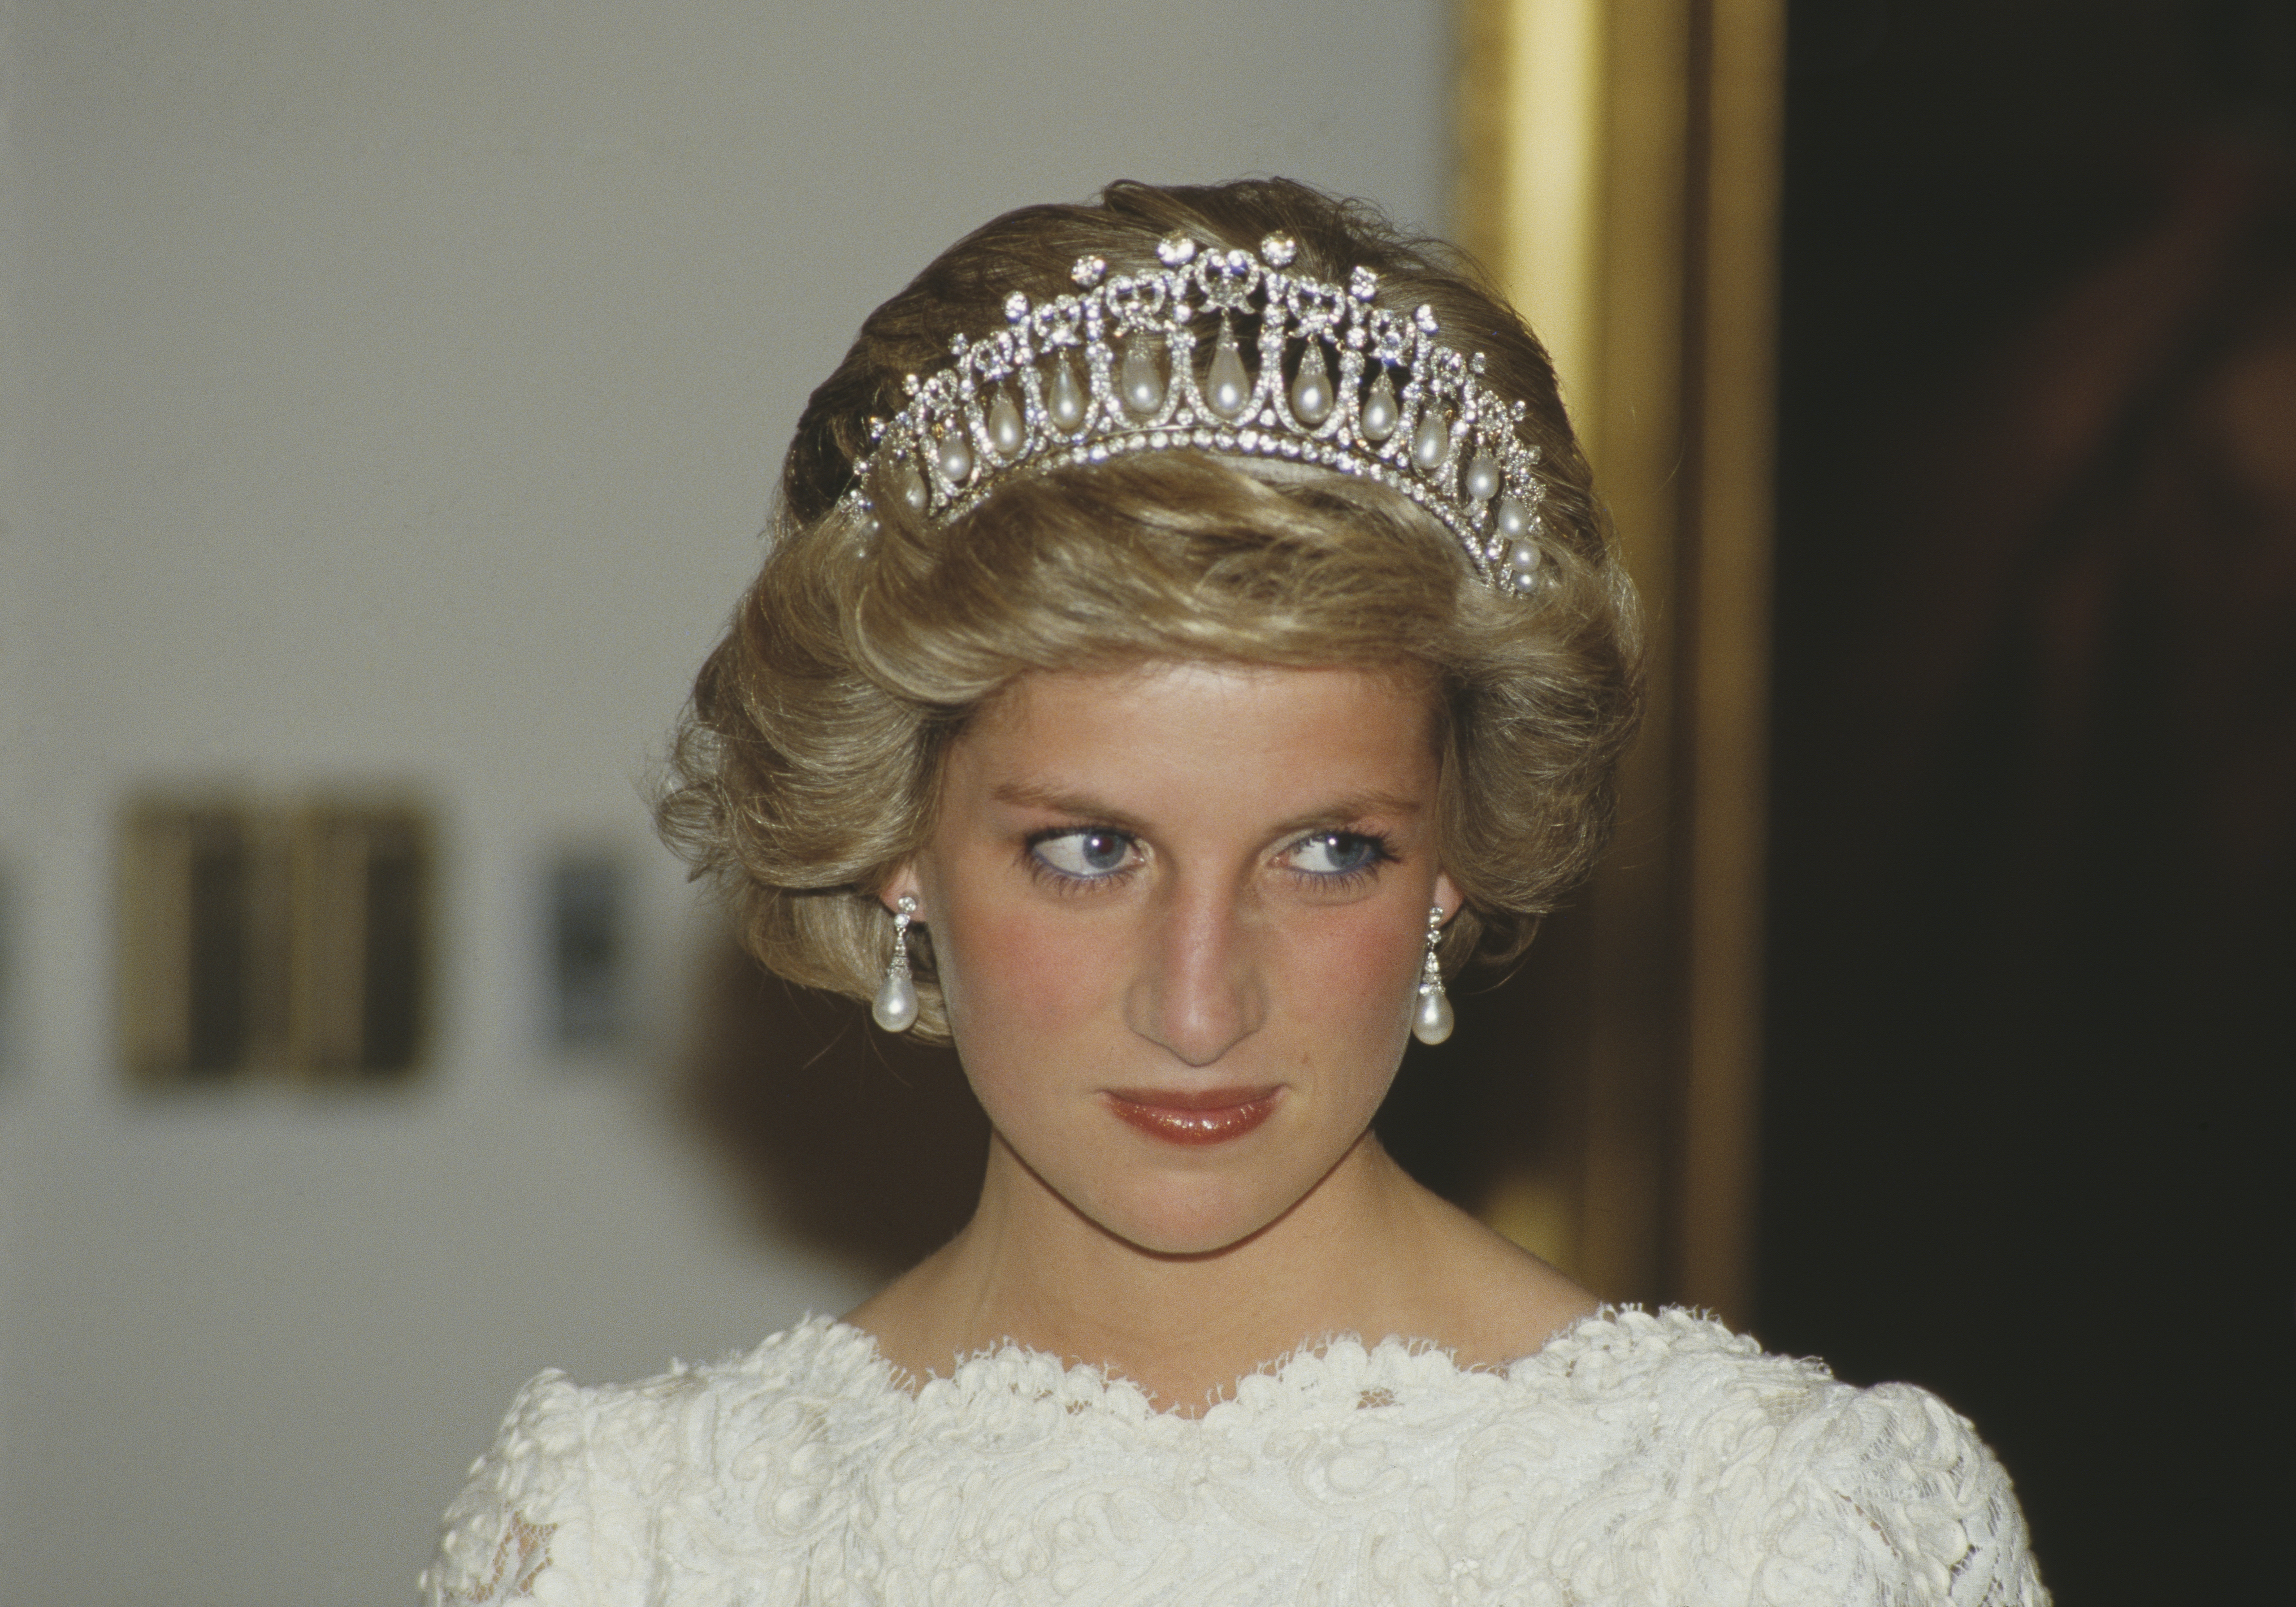 Diana, Princess of Wales attends a dinner at the British Embassy in Washington, DC, on November 1985. | Source: Getty Images